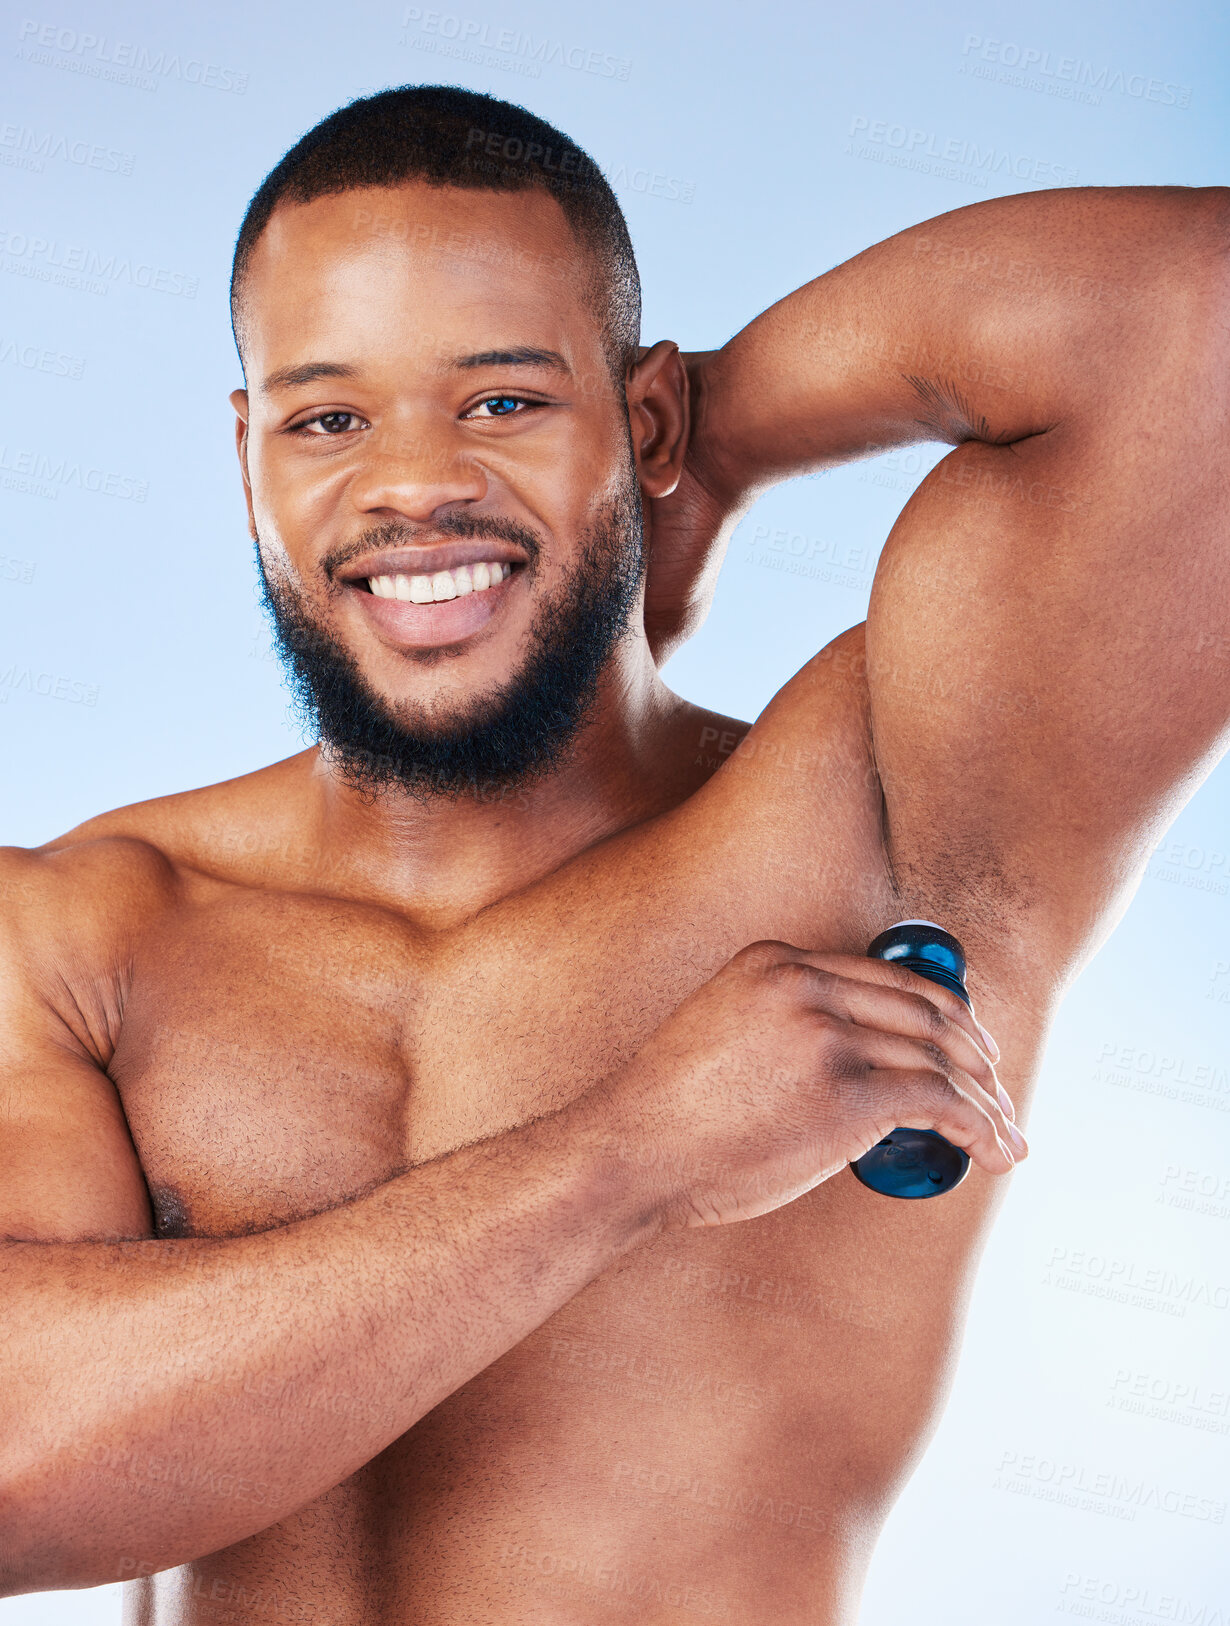 Buy stock photo Deodorant, products and portrait of black man for beauty, grooming and body hygiene on blue background. Skincare, health and male with antiperspirant, fragrance or scent product for underarm wellness